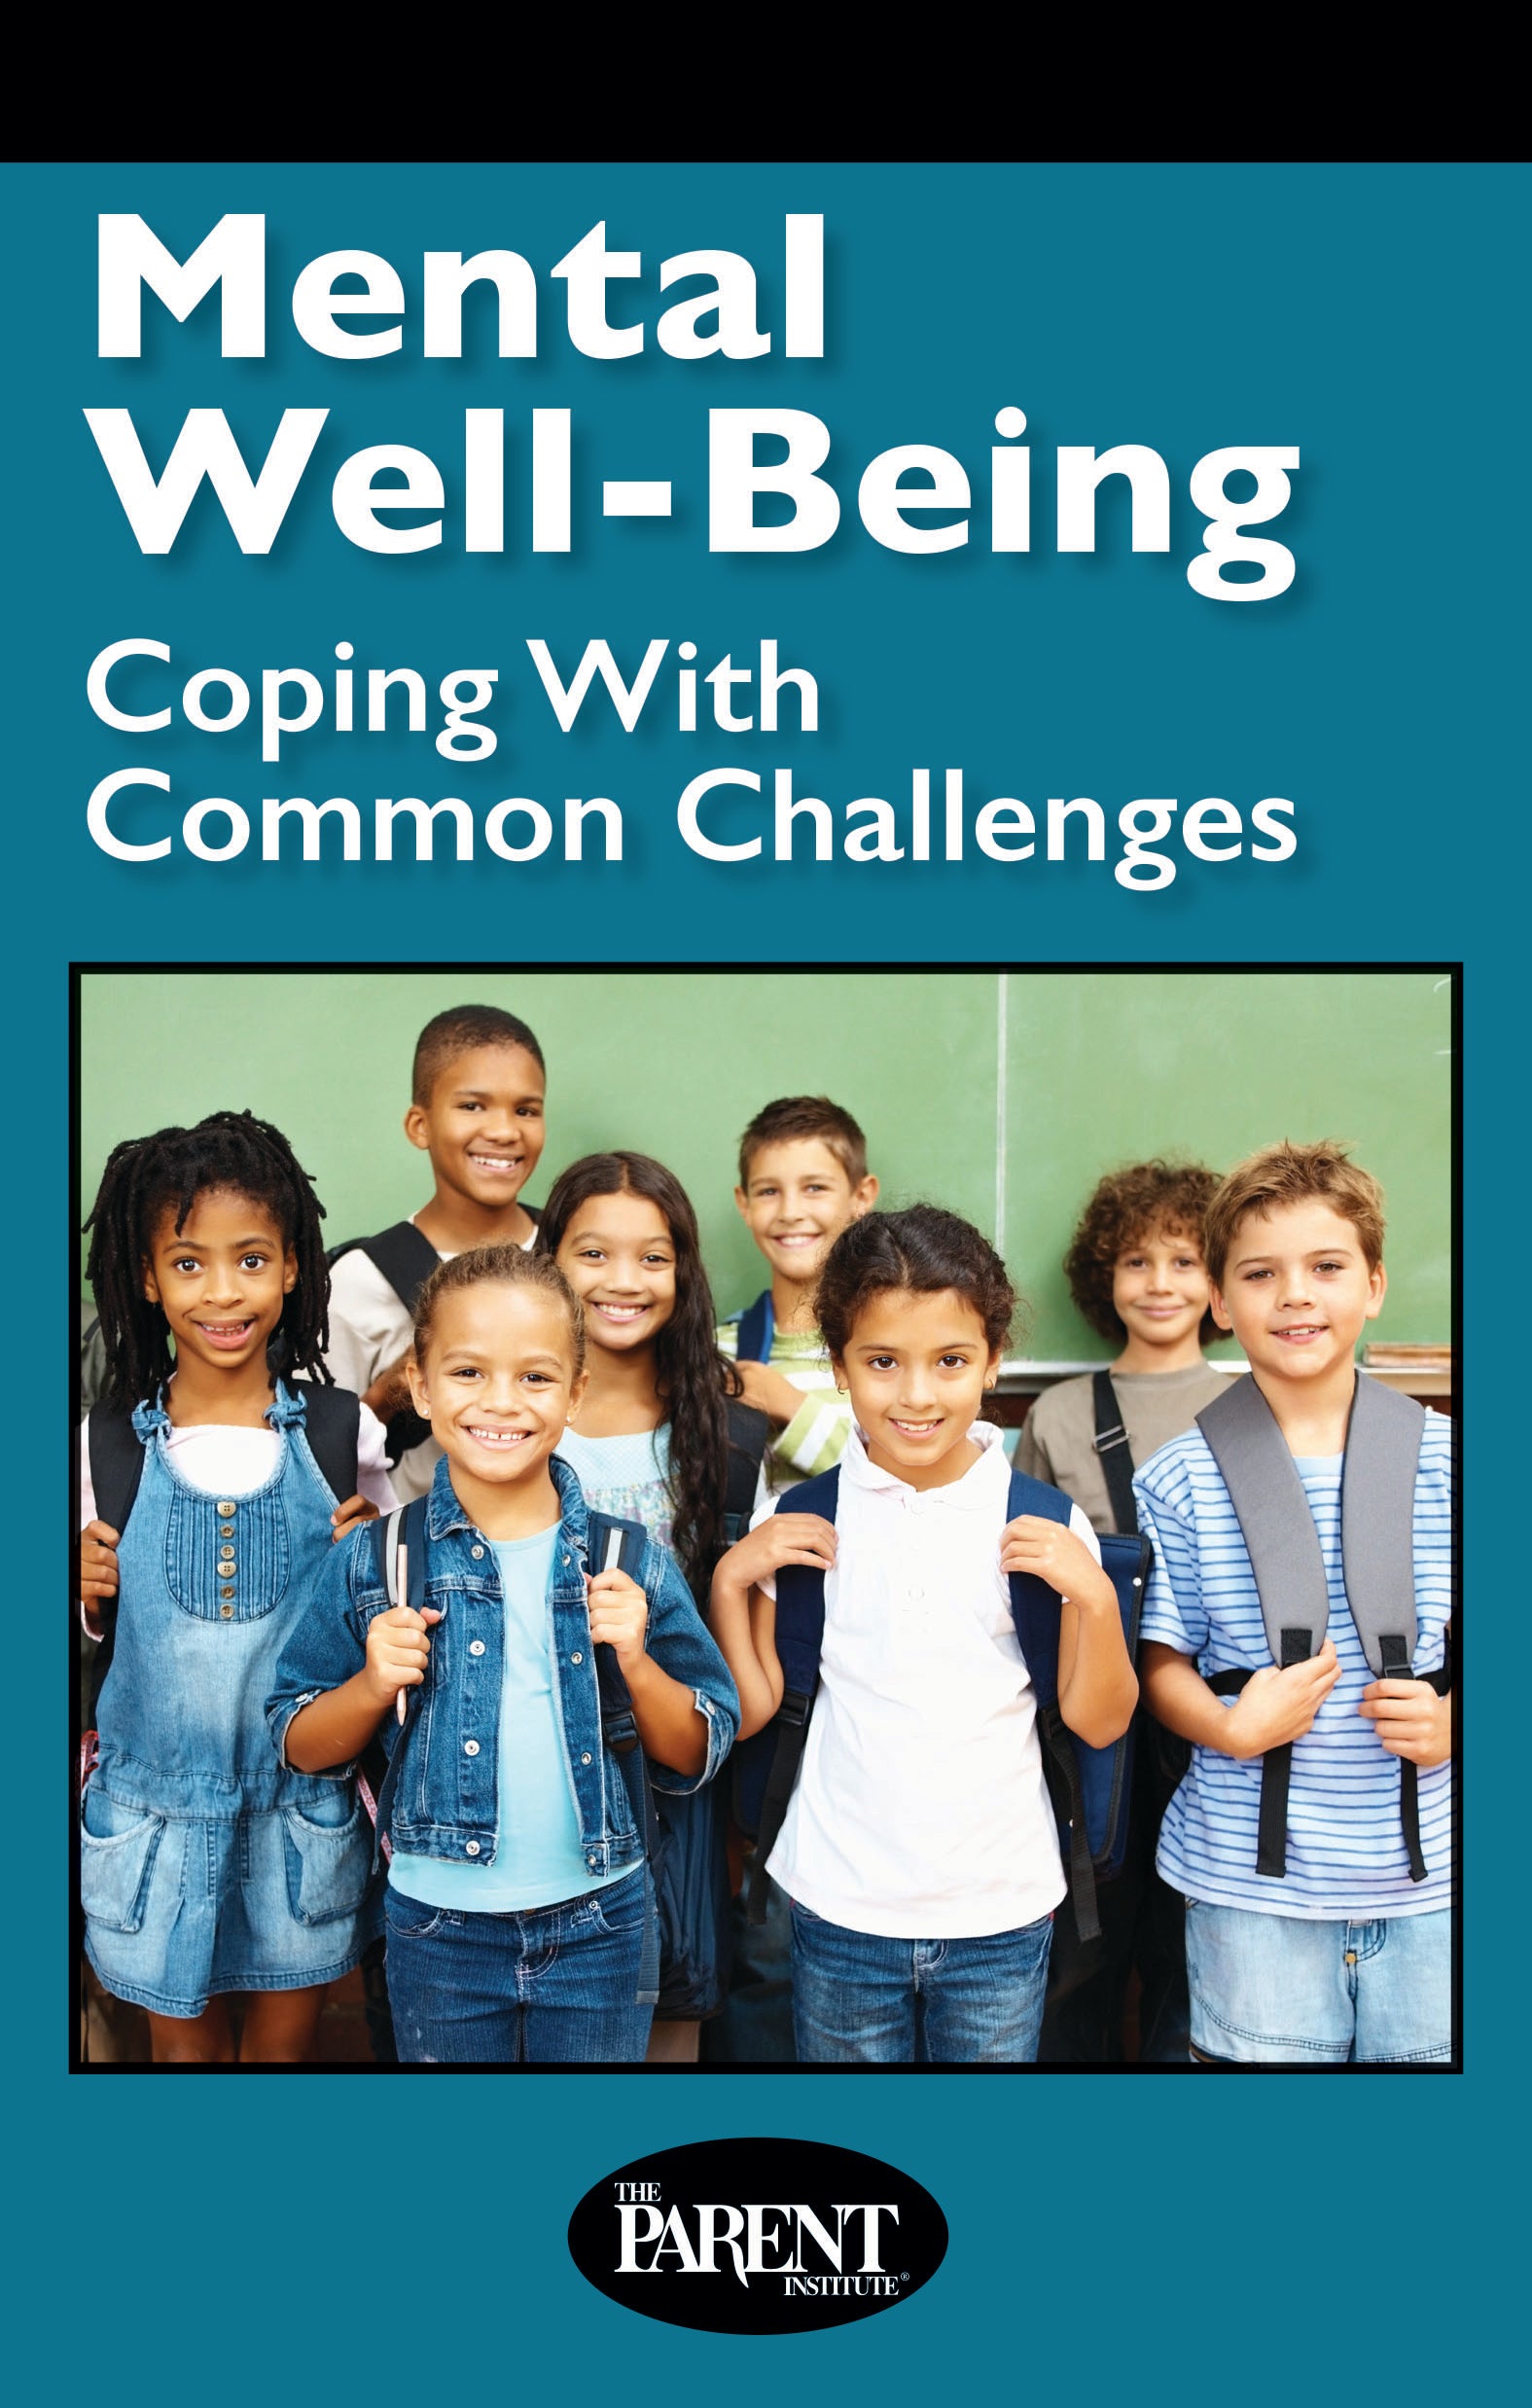 Mental Well-Being: Coping With Common Challenges (Electronic)